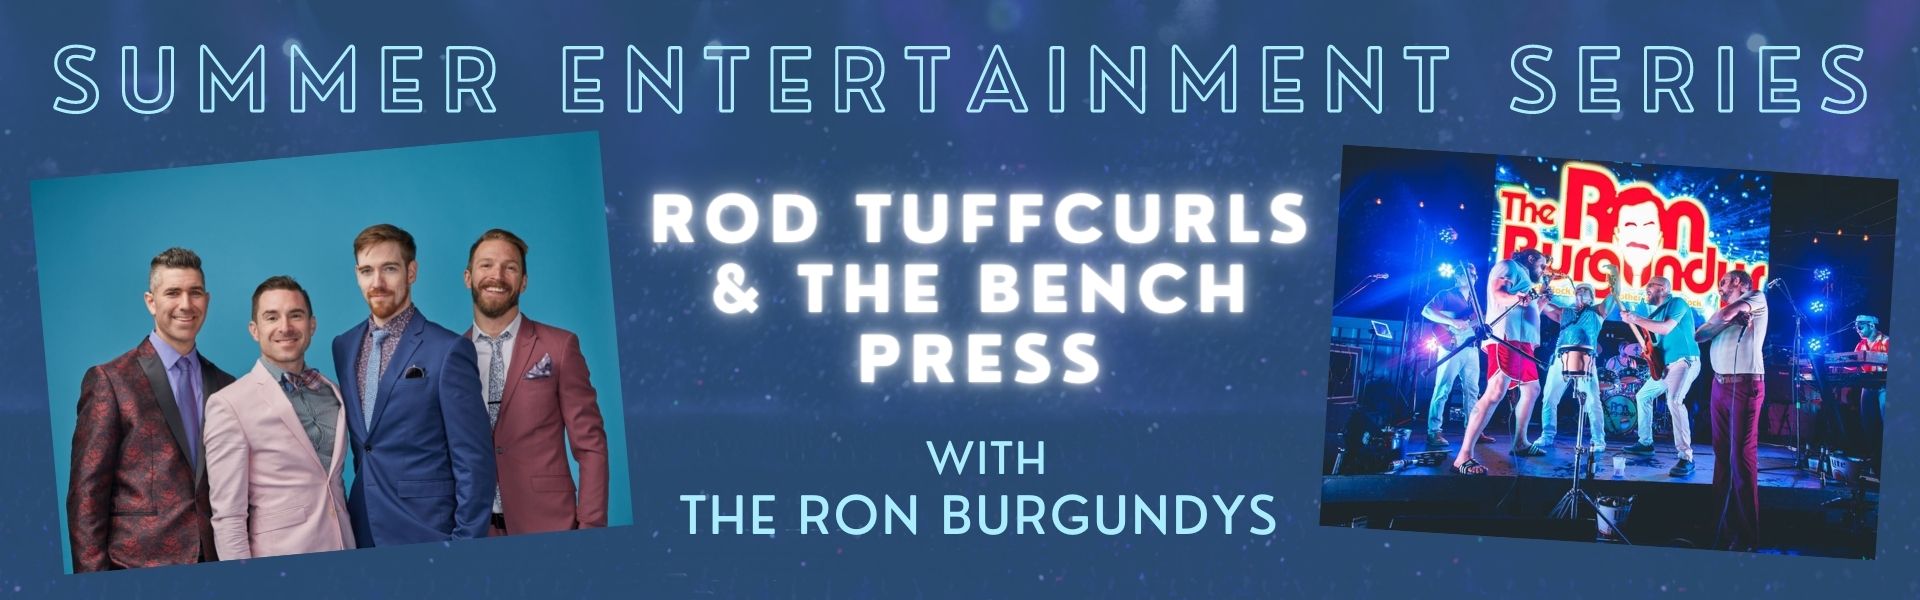 Summer Entertainment Series posters The Ron Burgundys